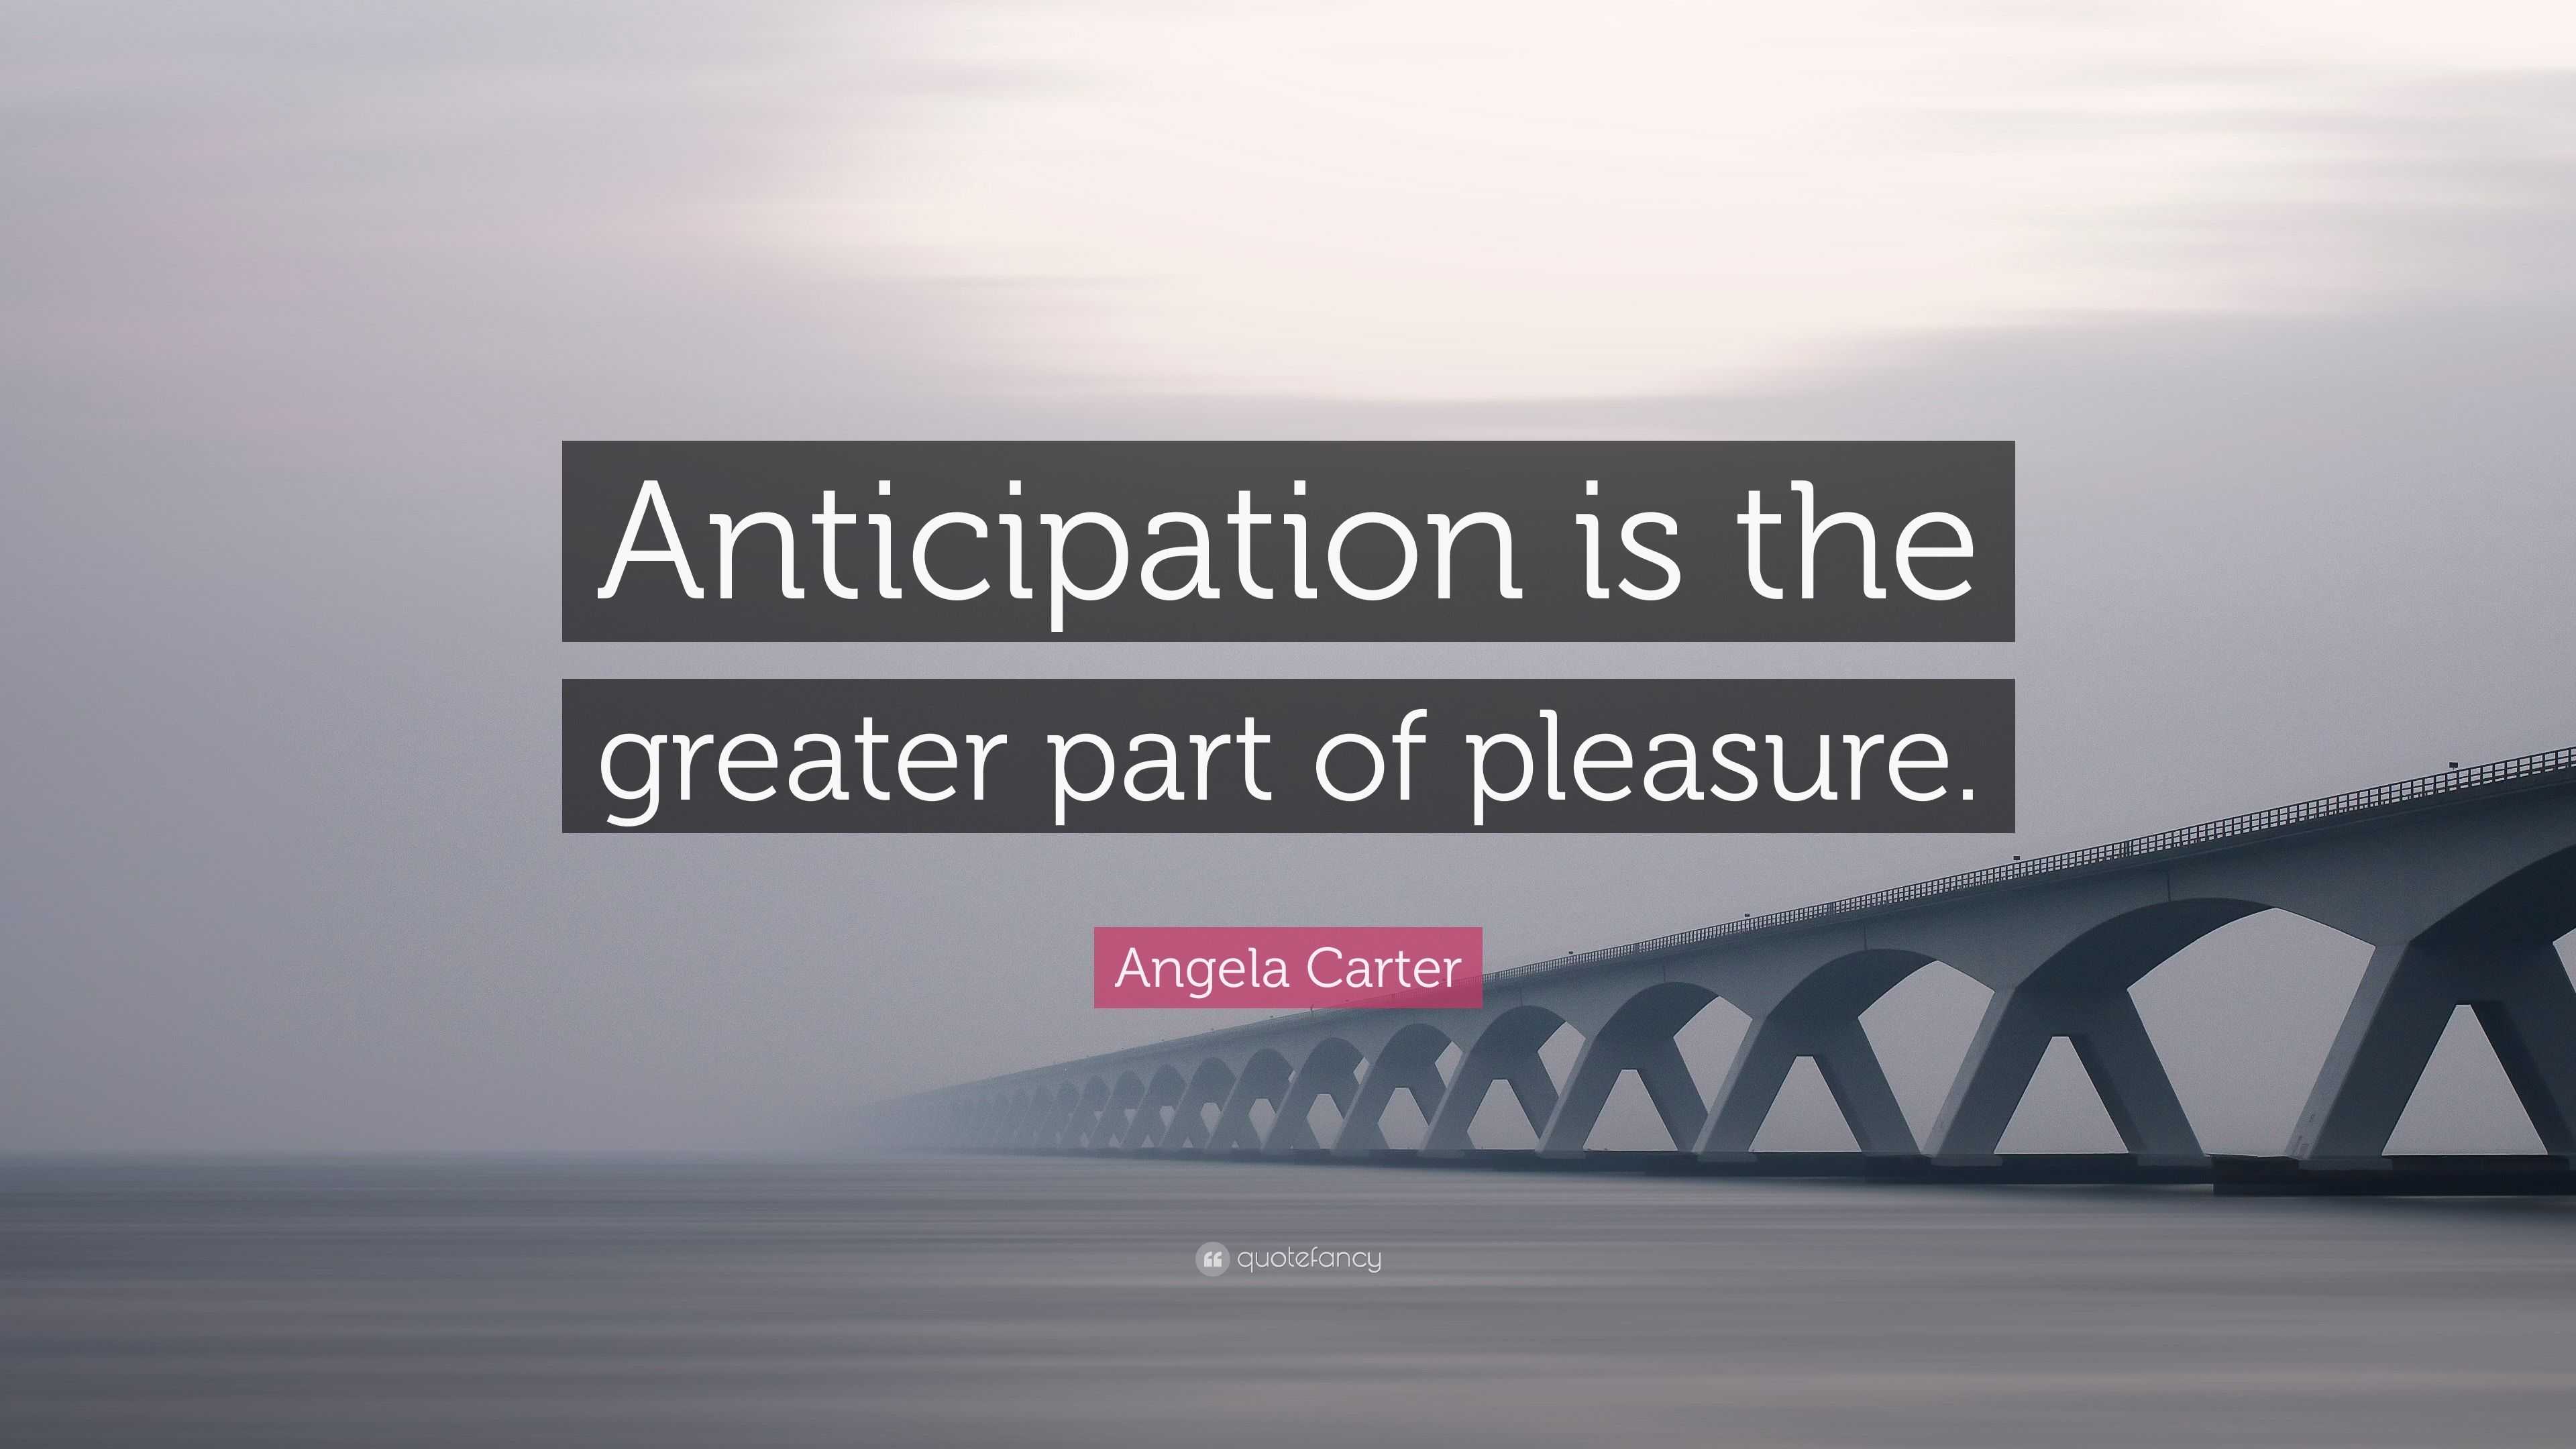 Angela Carter Quote: "Anticipation is the greater part of ...